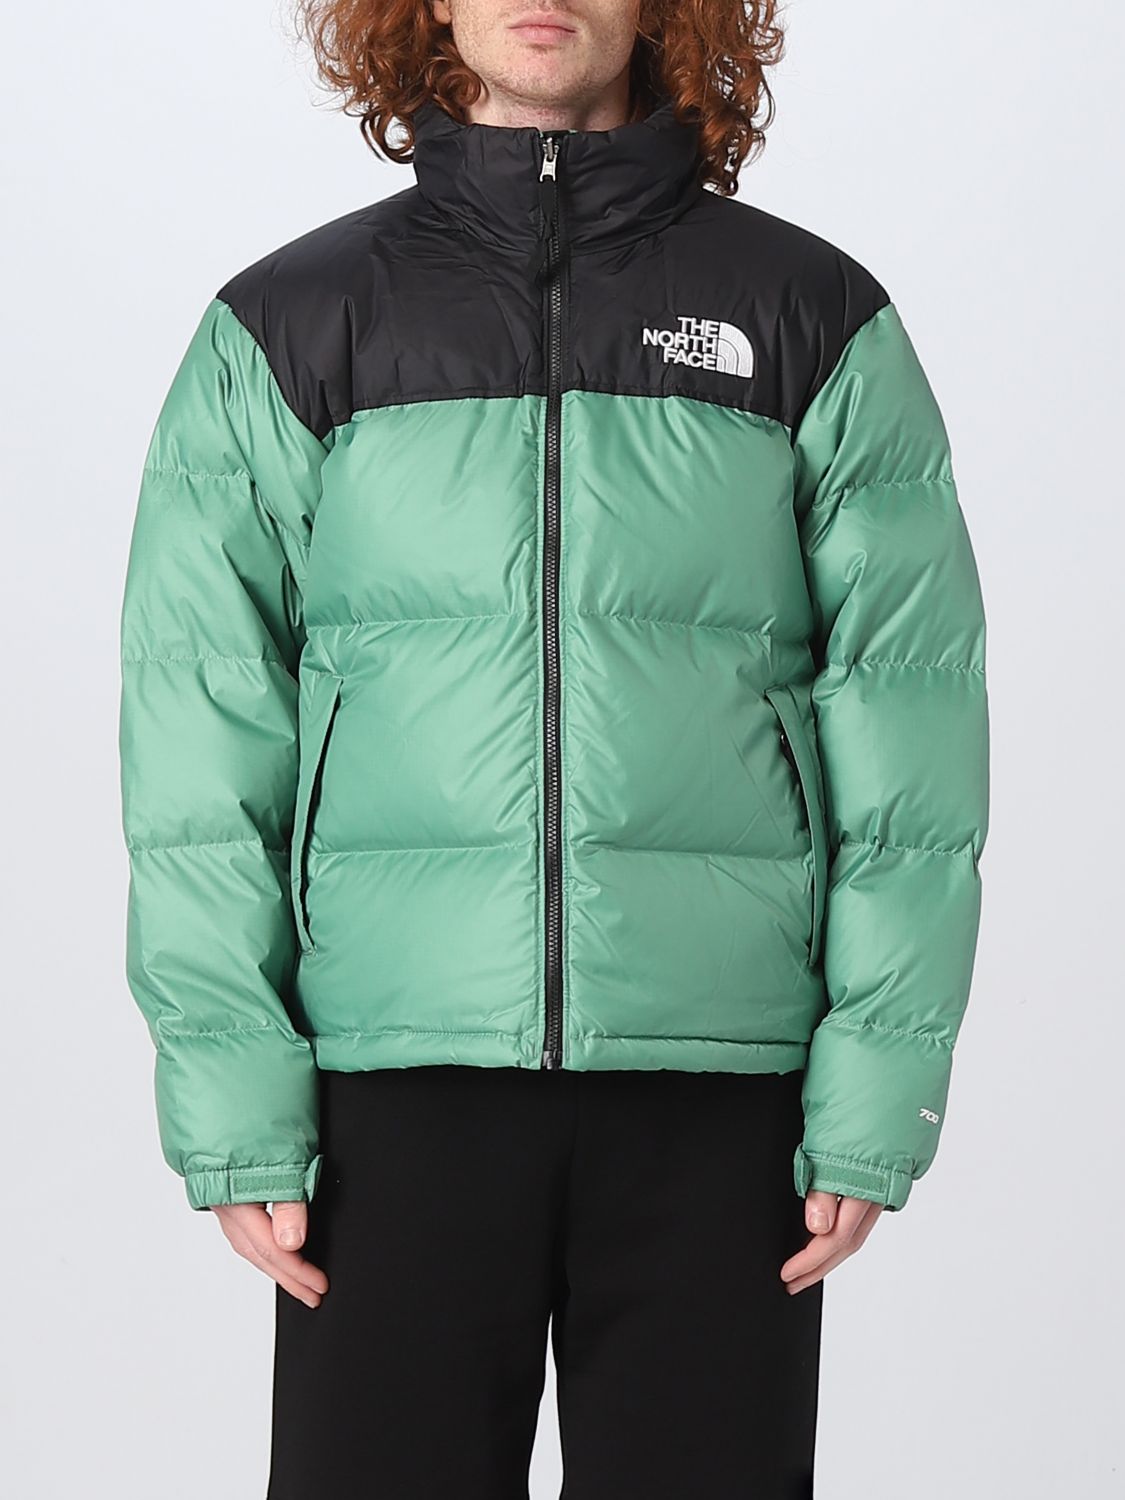 Laat je zien Absurd Koken THE NORTH FACE: jacket for man - Green | The North Face jacket NF0A3C8D  online on GIGLIO.COM